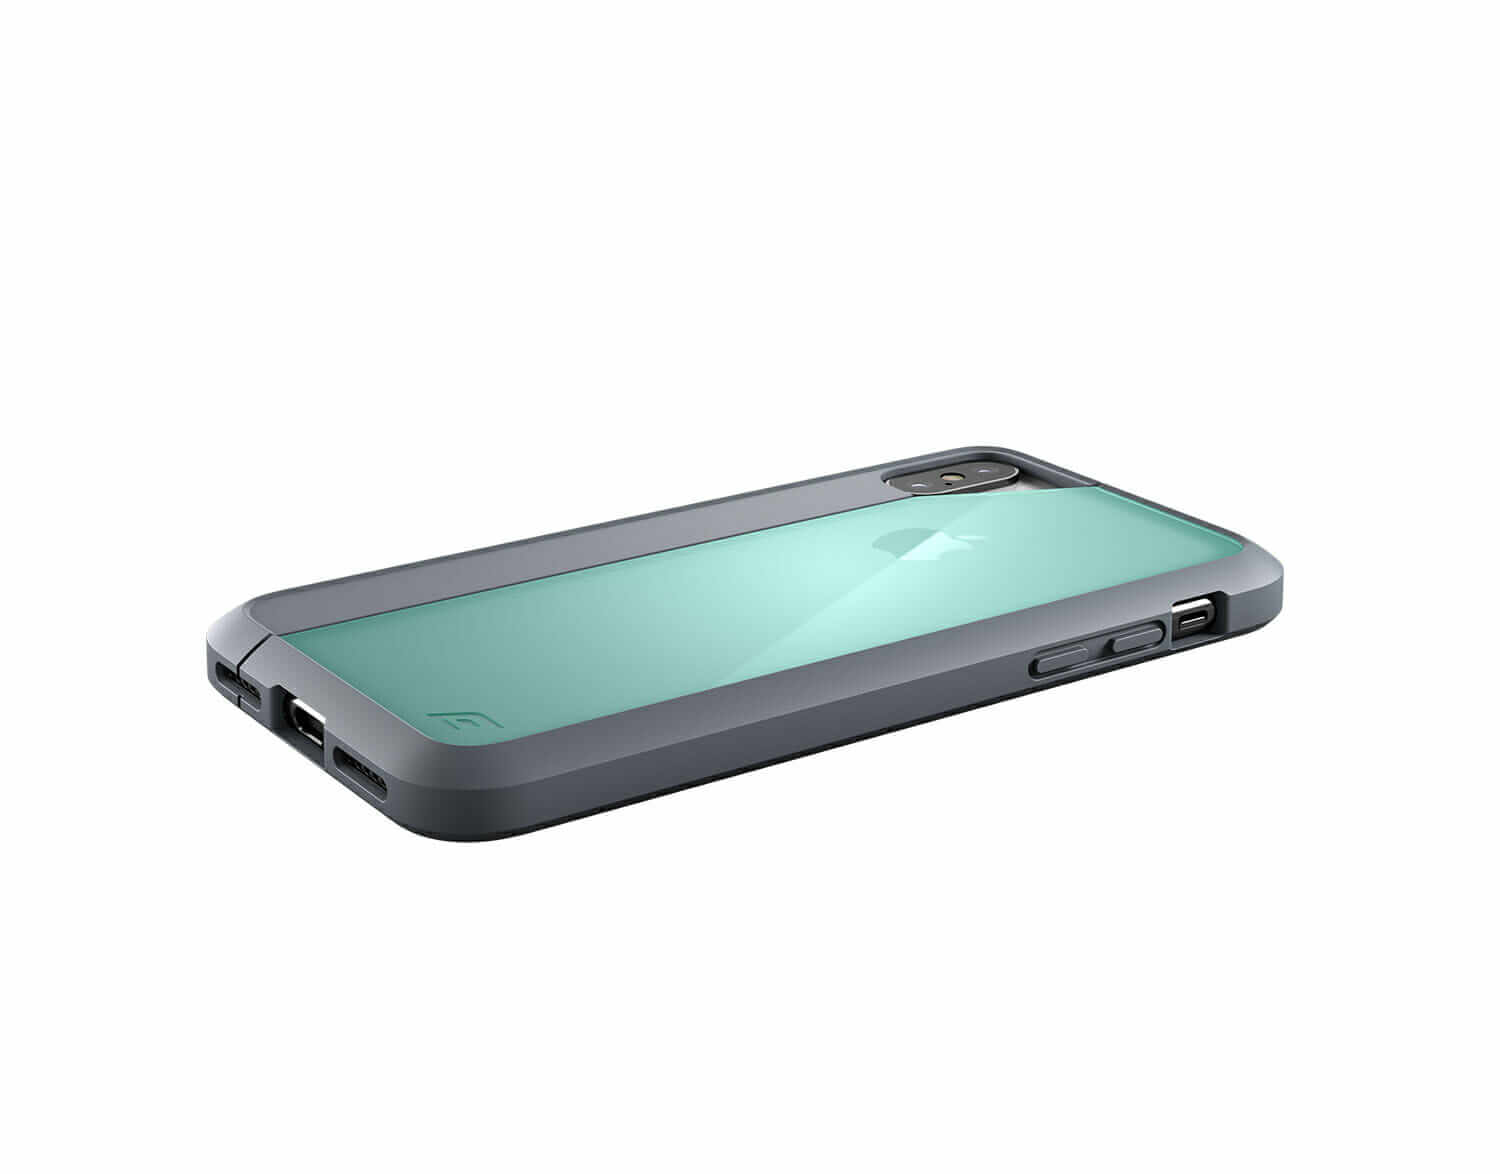 Element Case SHADOW case for iPhone X/Xs, XR, XS Max - IN STOCK